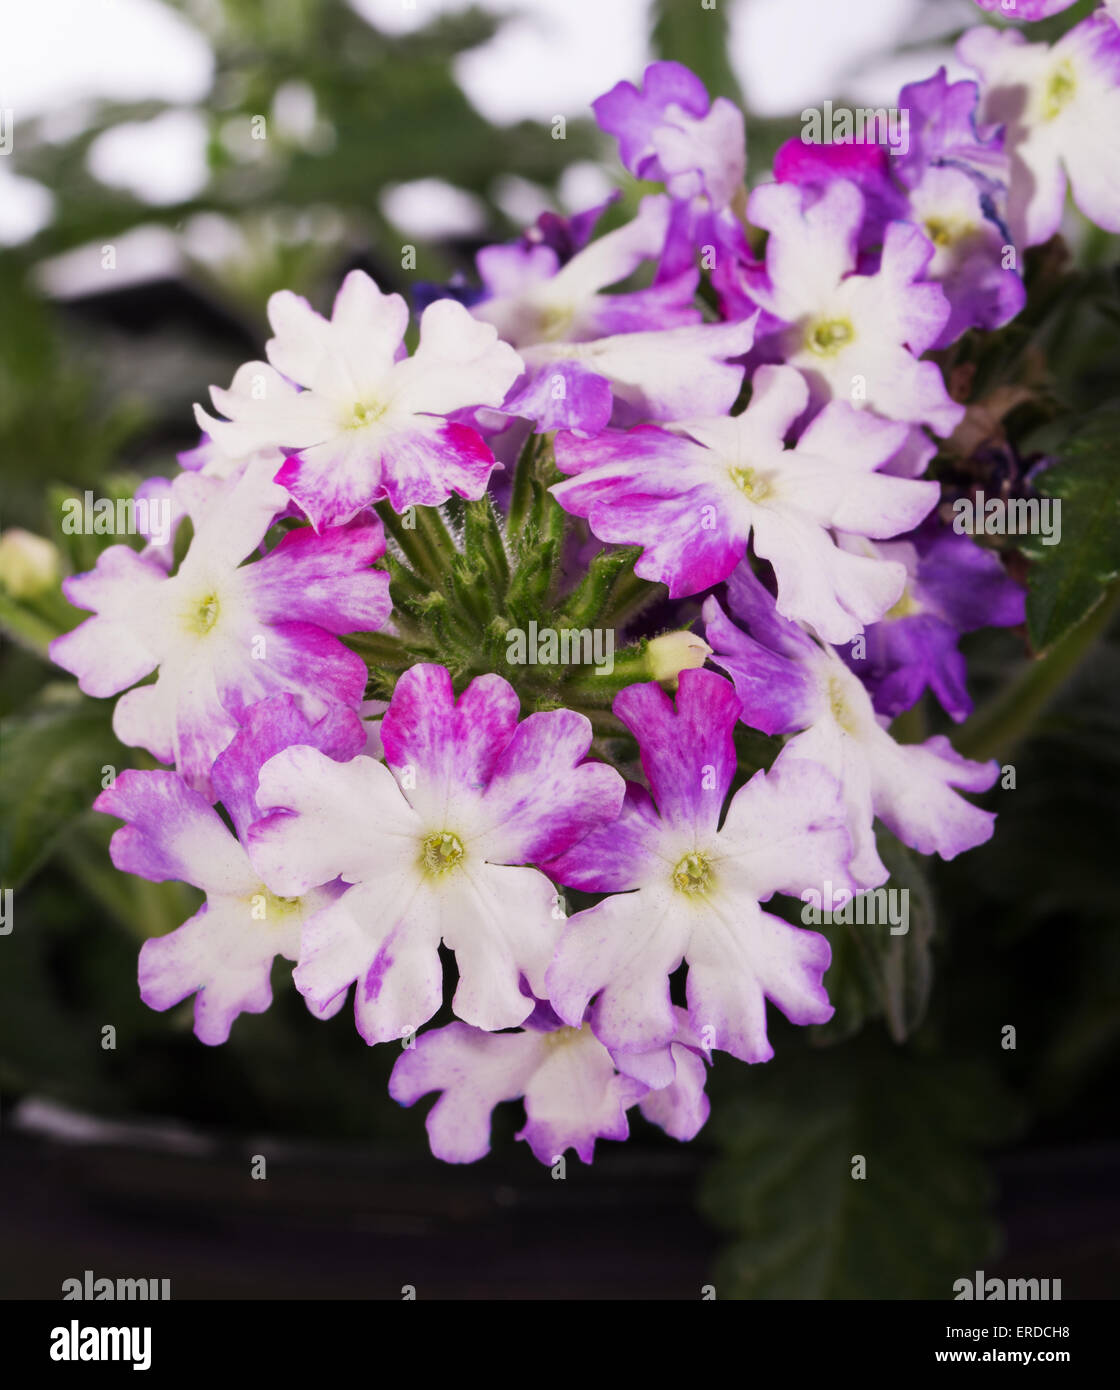 Two toned white and purple Verbena flower Stock Photo